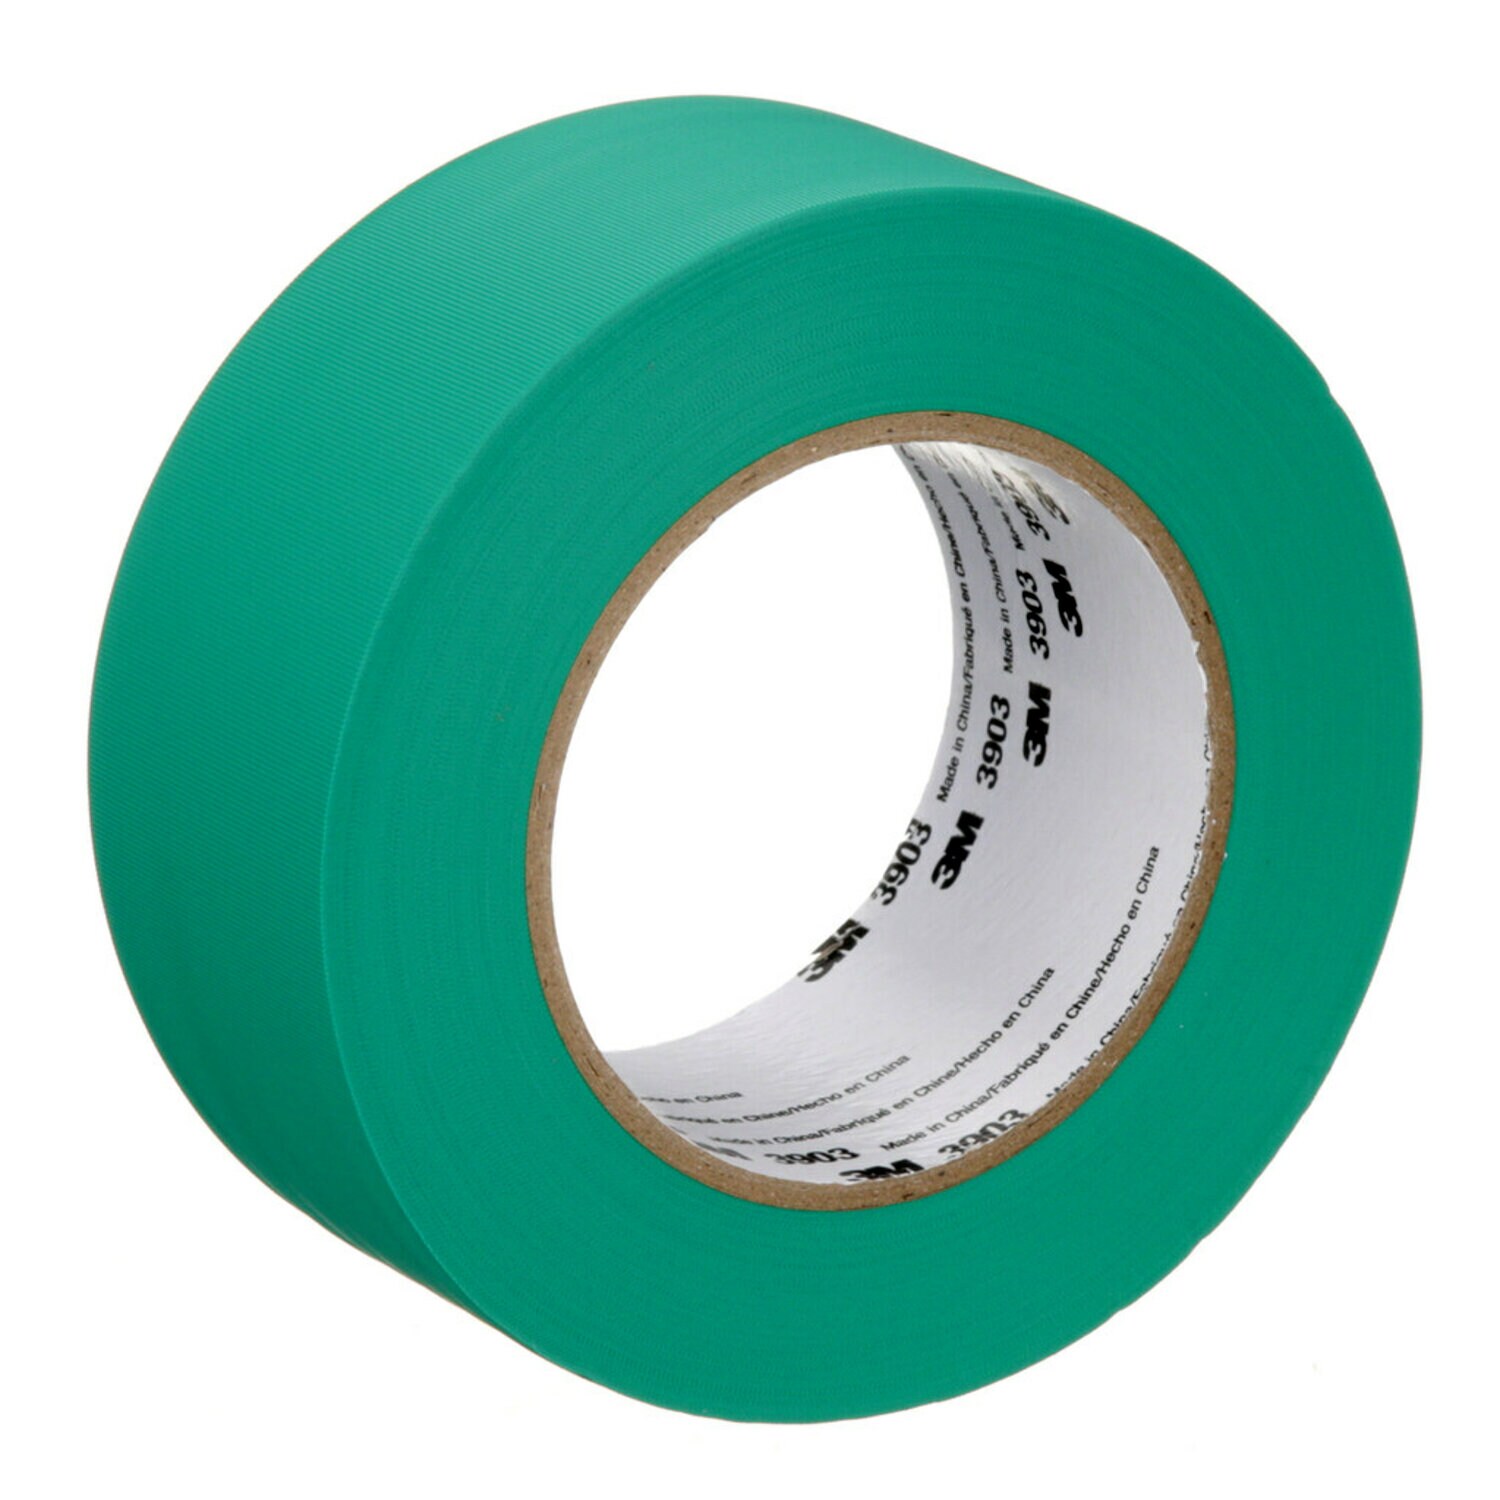 7100145926 - 3M Vinyl Duct Tape 3903, Green, 2 in x 50 yd, 6.5 mil, 24/Case,
Individually Wrapped Conveniently Packaged